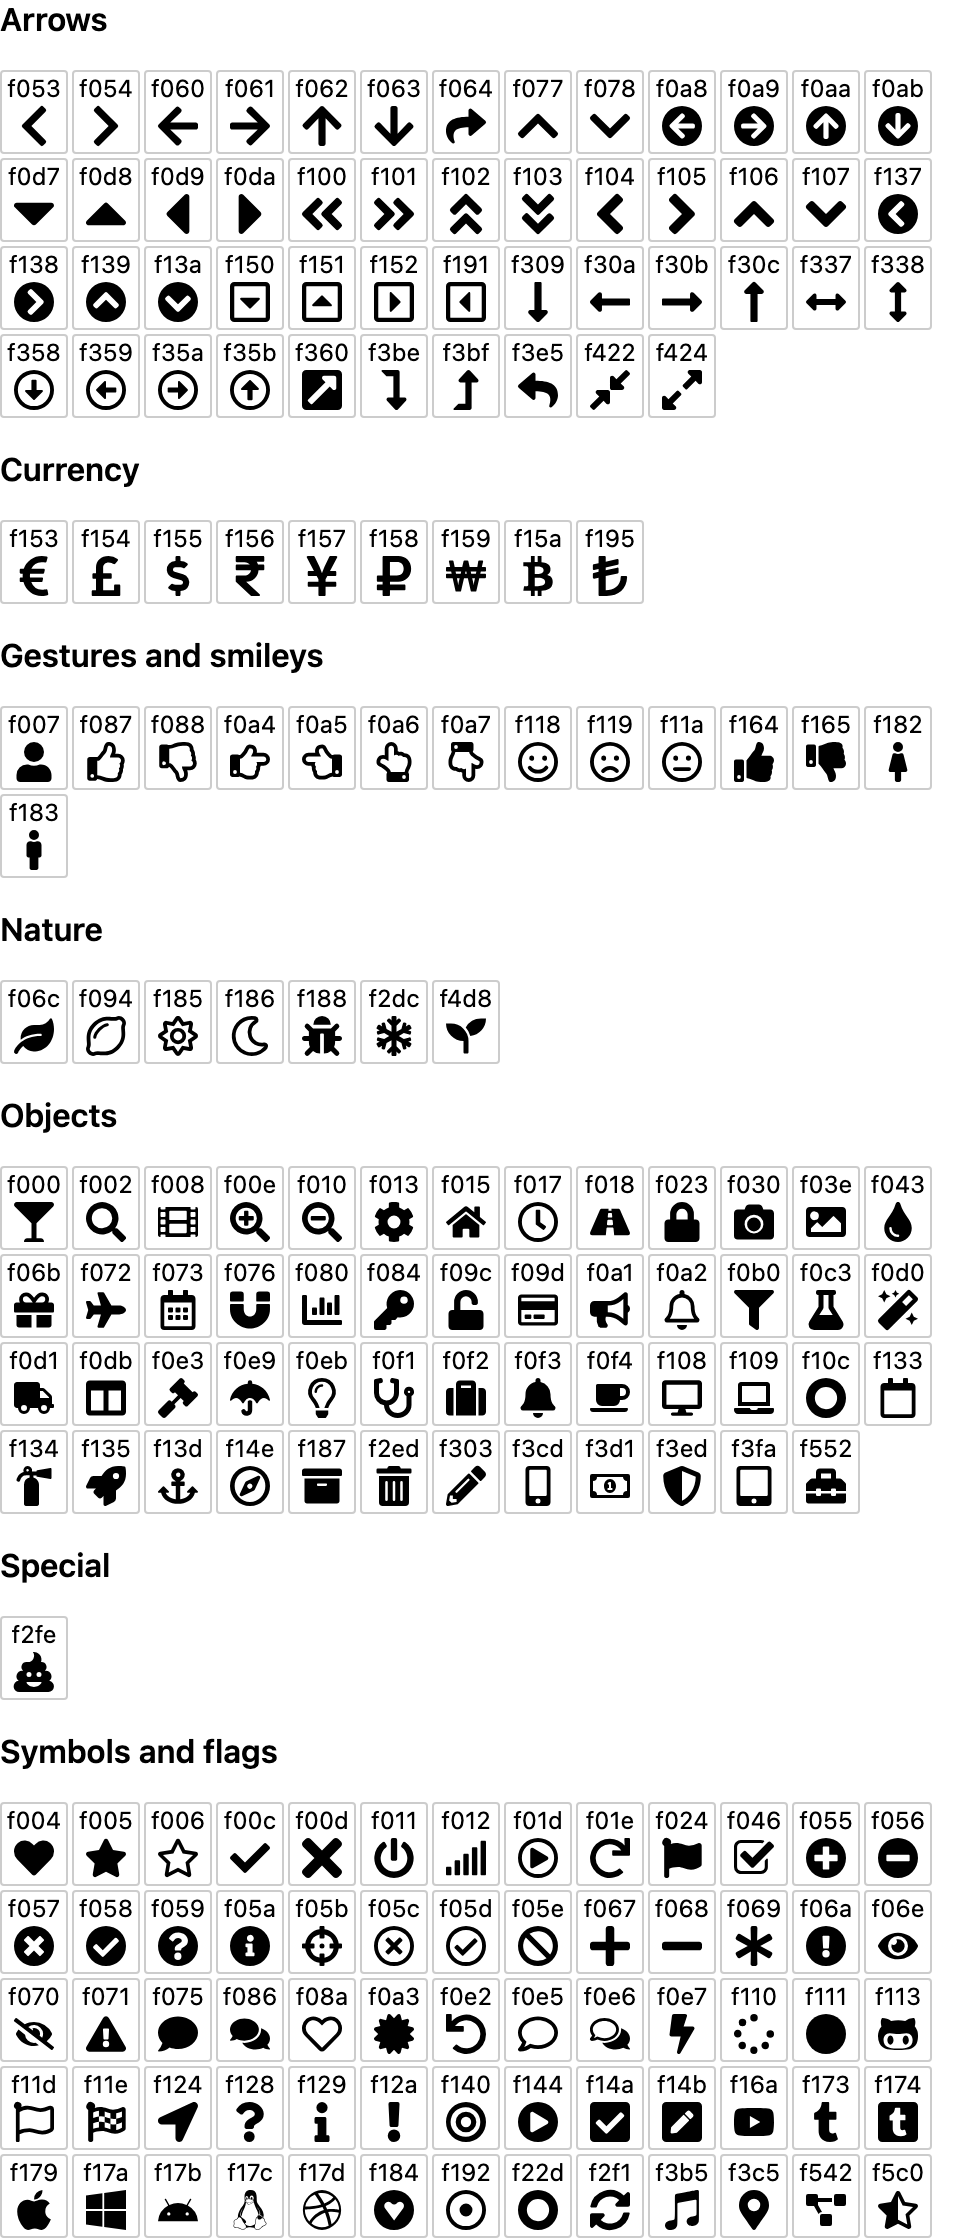 /img/icons.png